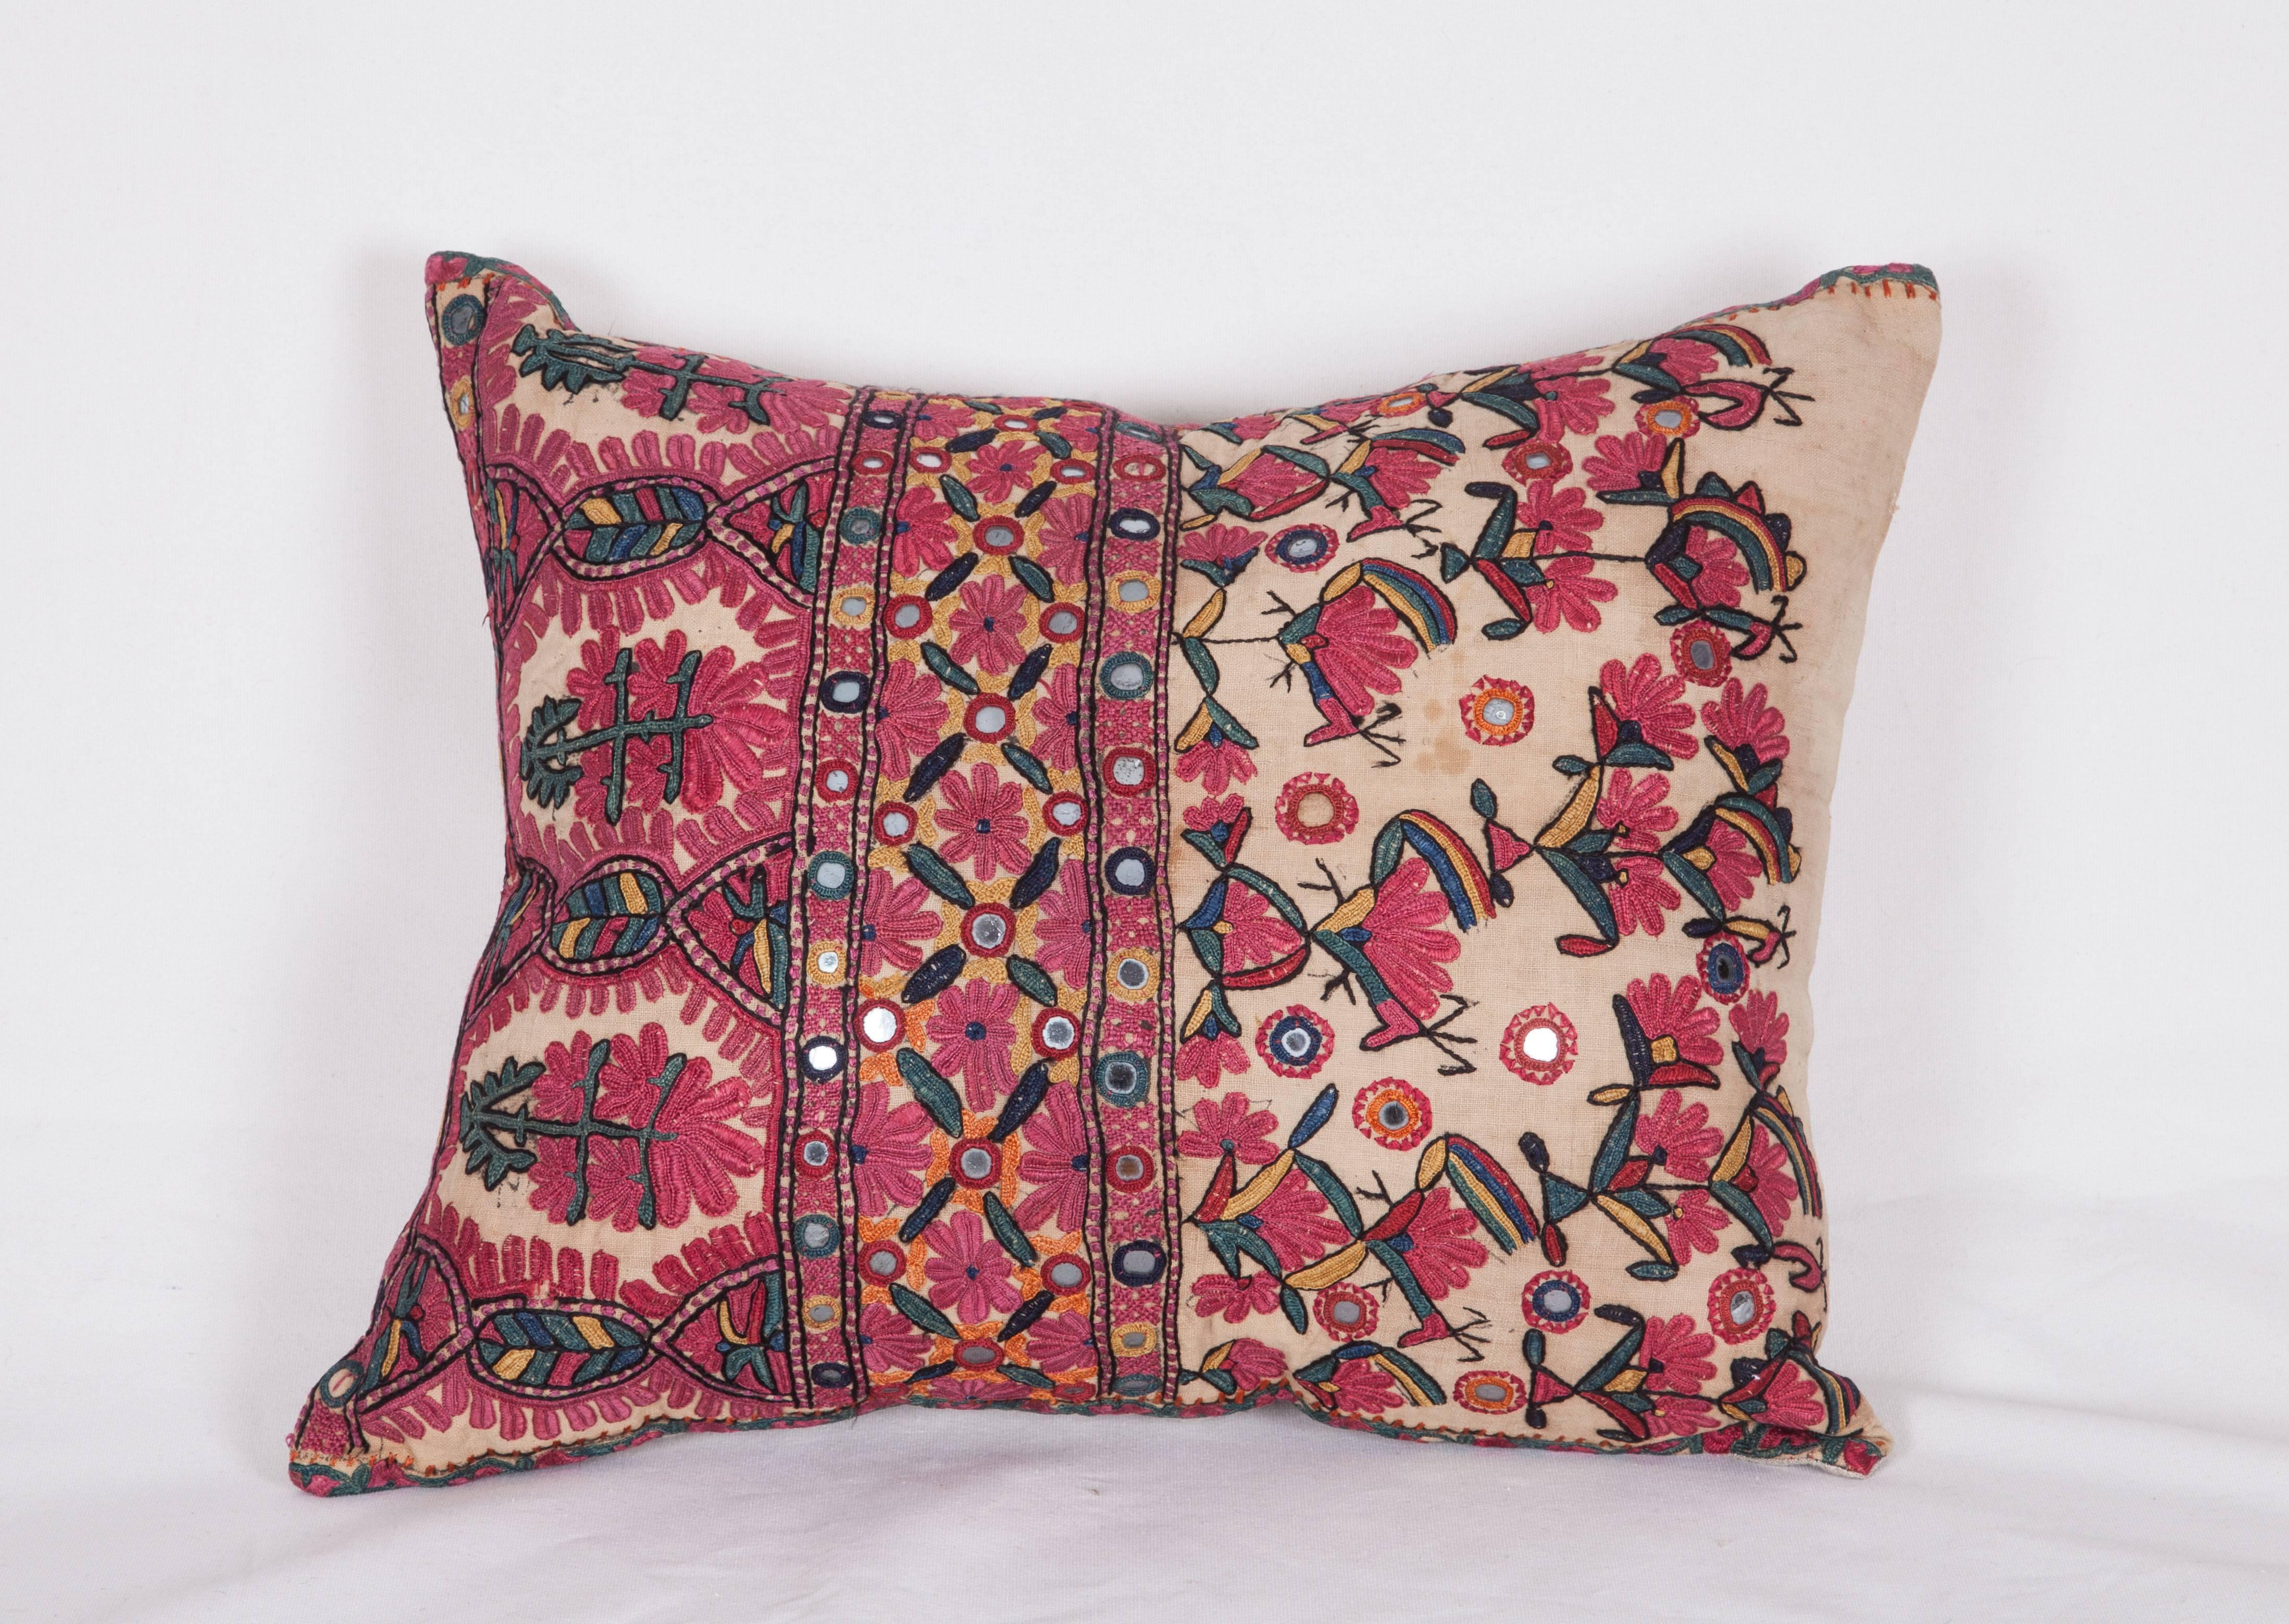 Pakistani Antique Pillow Made Out of a Late 19th Century Sind Embroidery